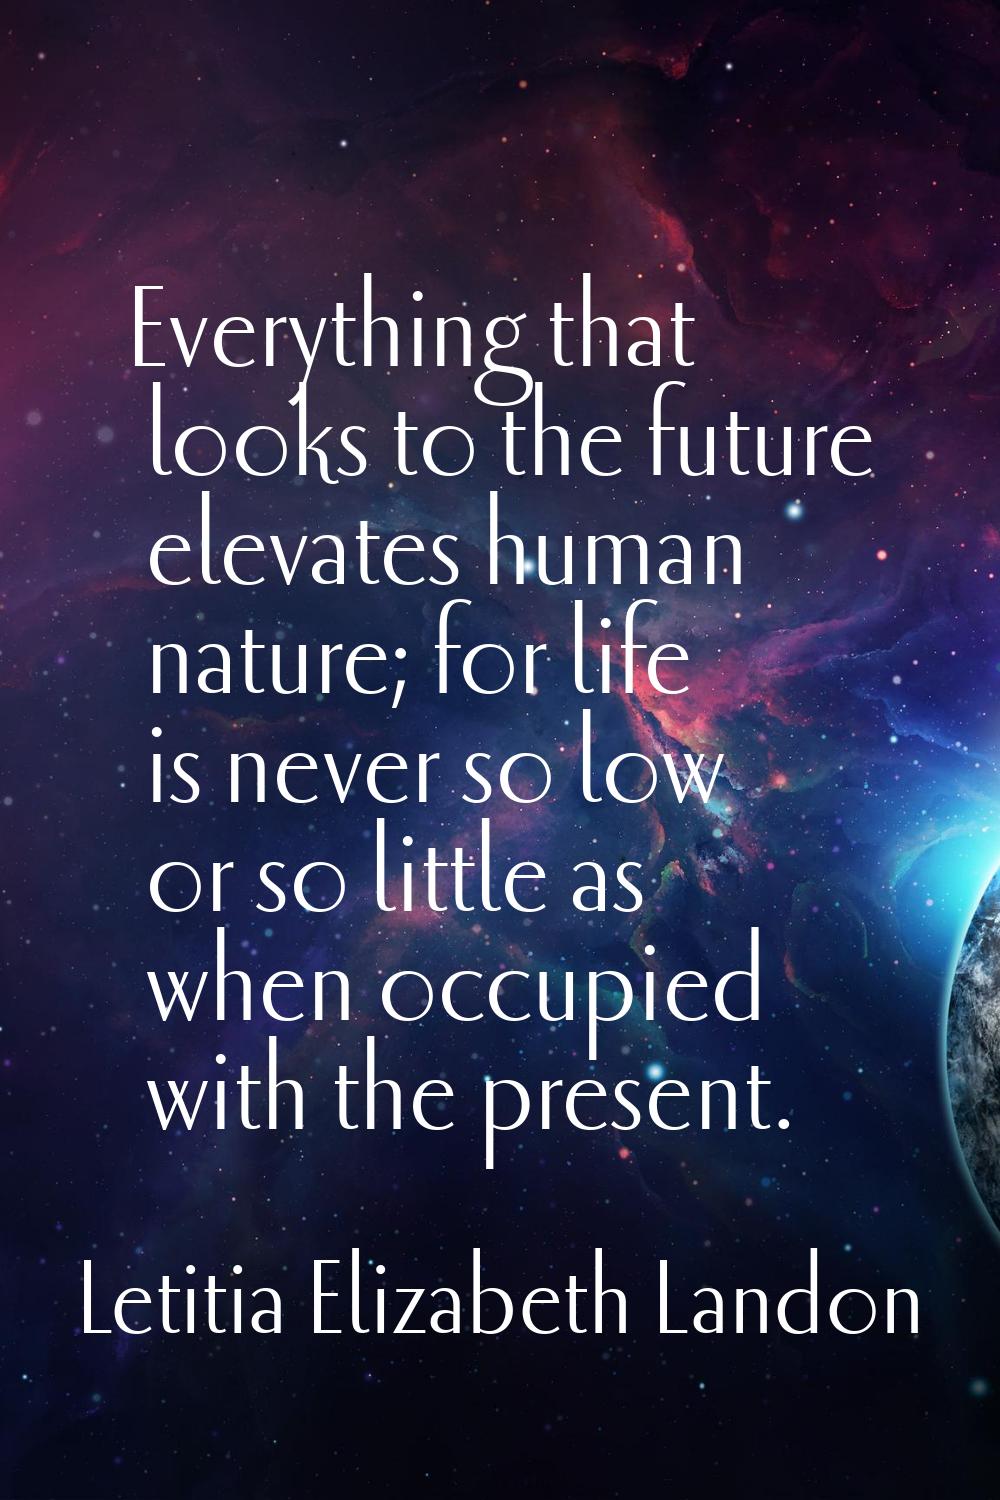 Everything that looks to the future elevates human nature; for life is never so low or so little as